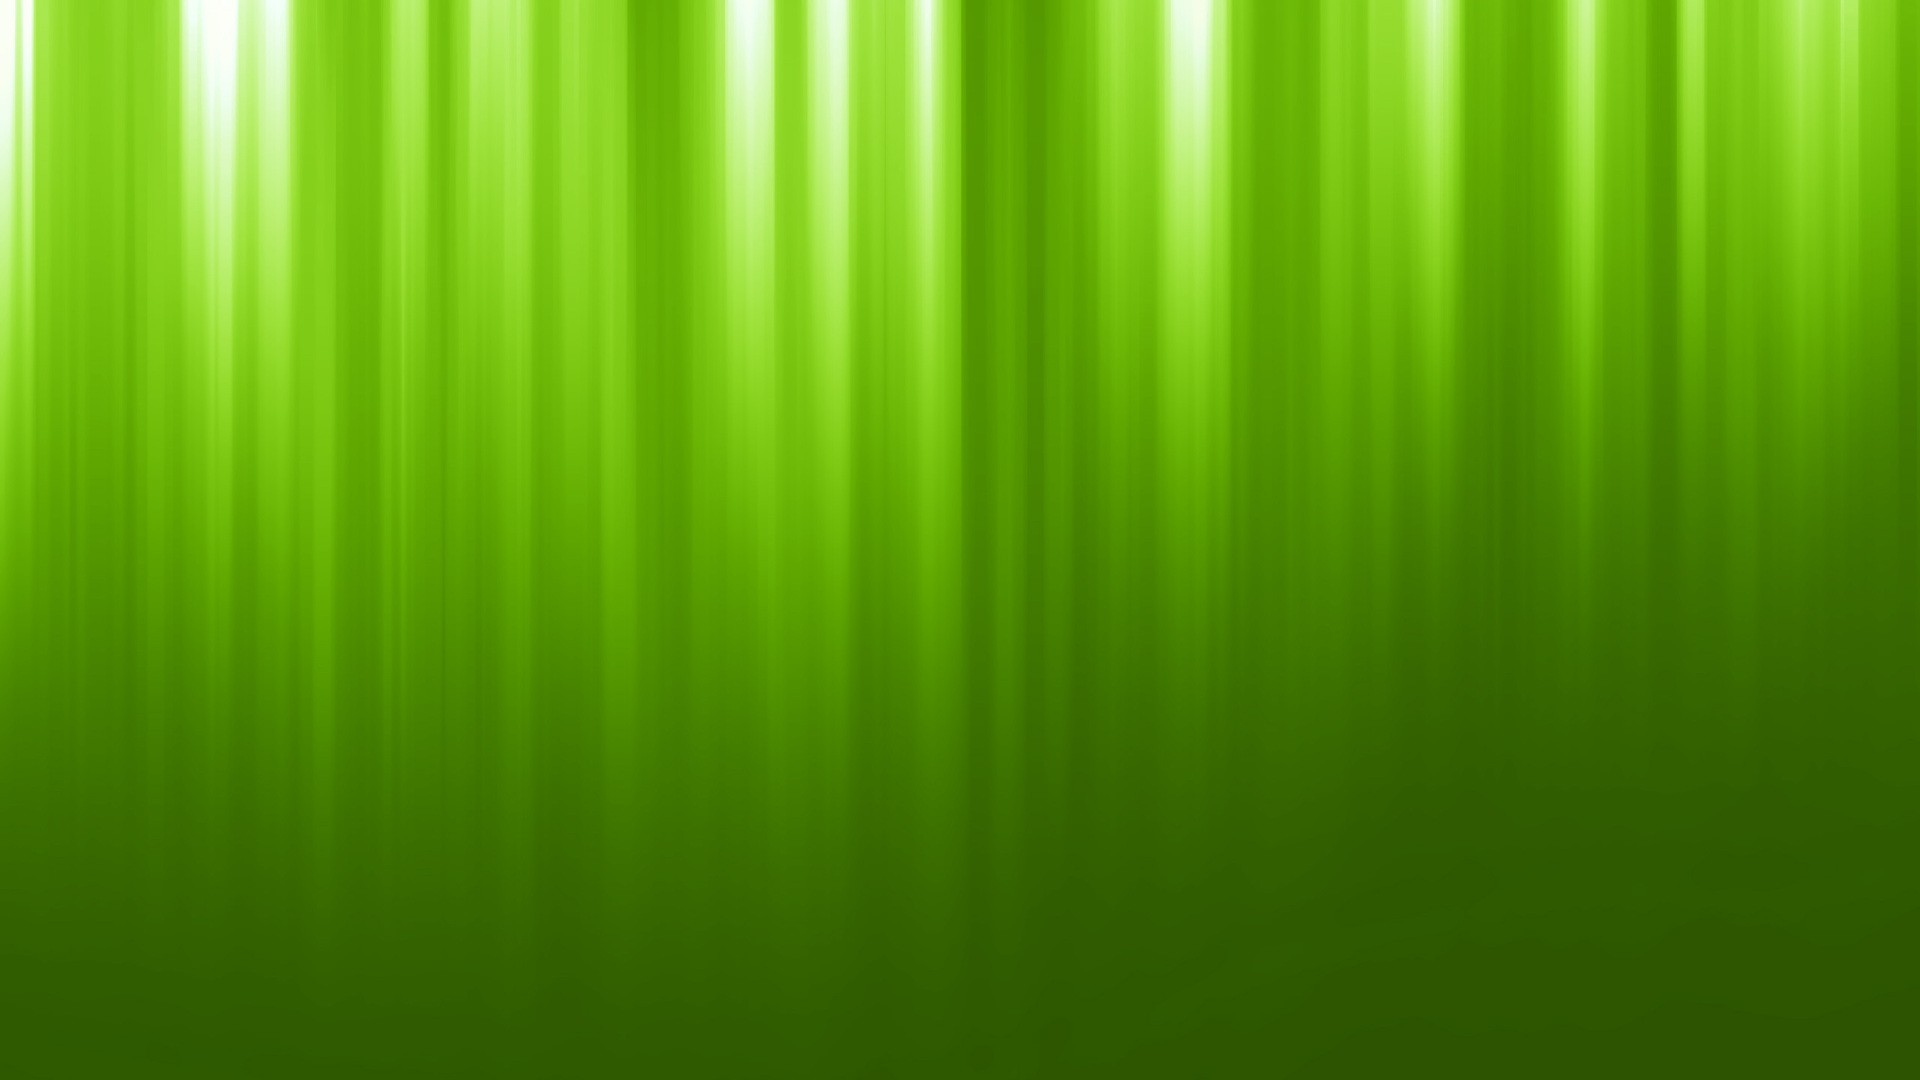 Wallpapers Computer Light Green With Resolution 1920X1080 pixel. You can make this wallpaper for your Desktop Computer Backgrounds, Mac Wallpapers, Android Lock screen or iPhone Screensavers